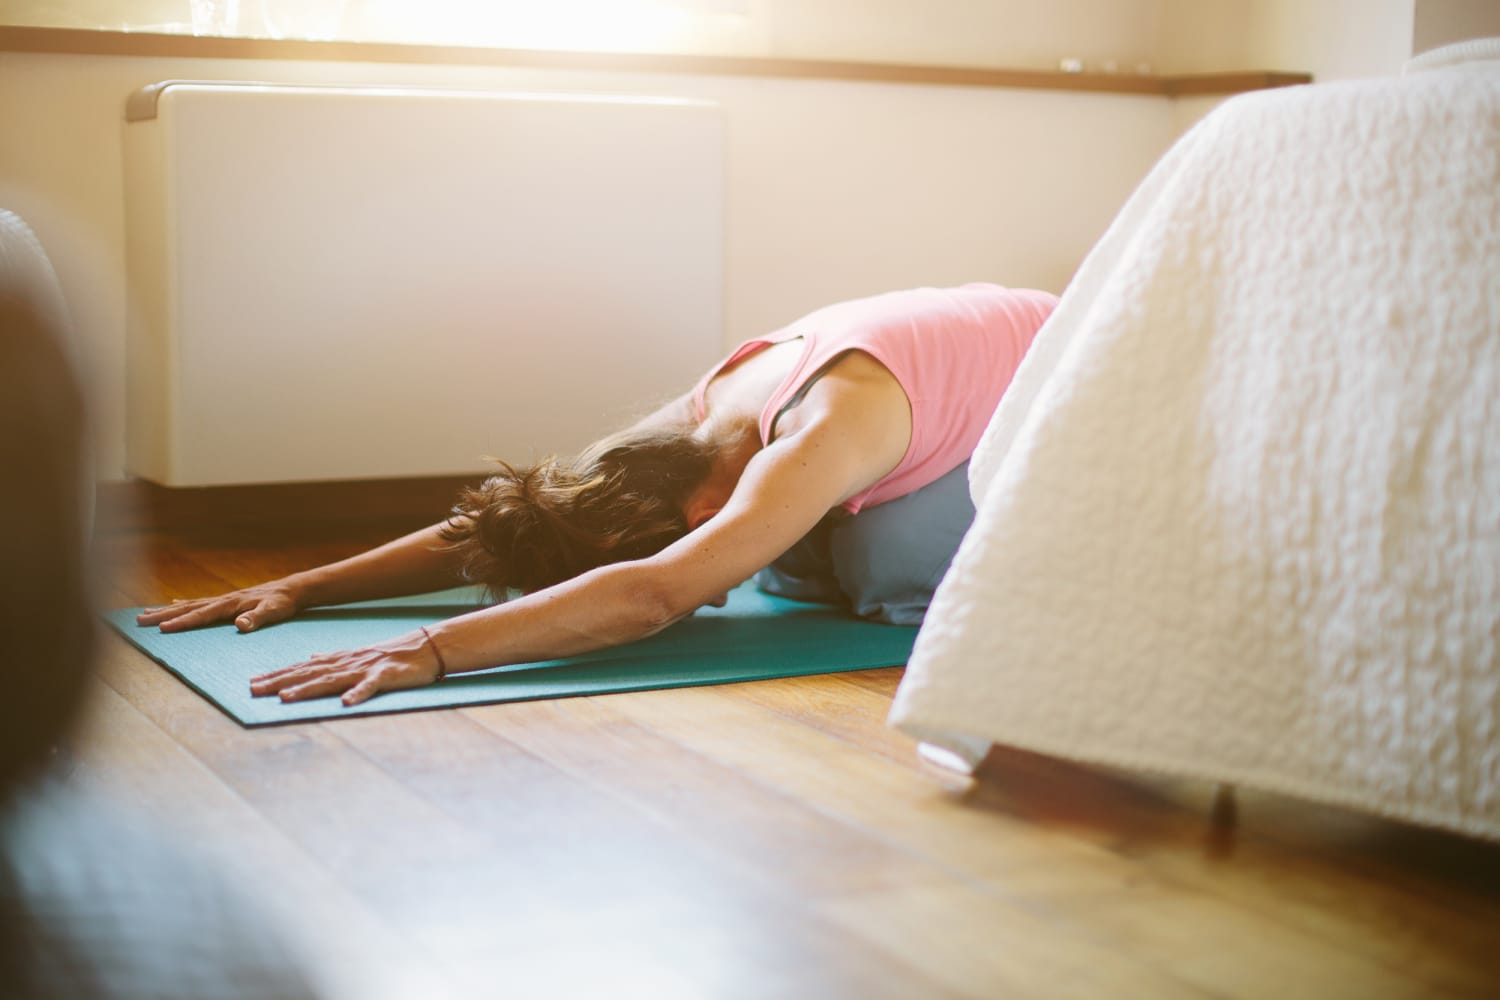 12 Yoga Poses for a Great Night's Sleep